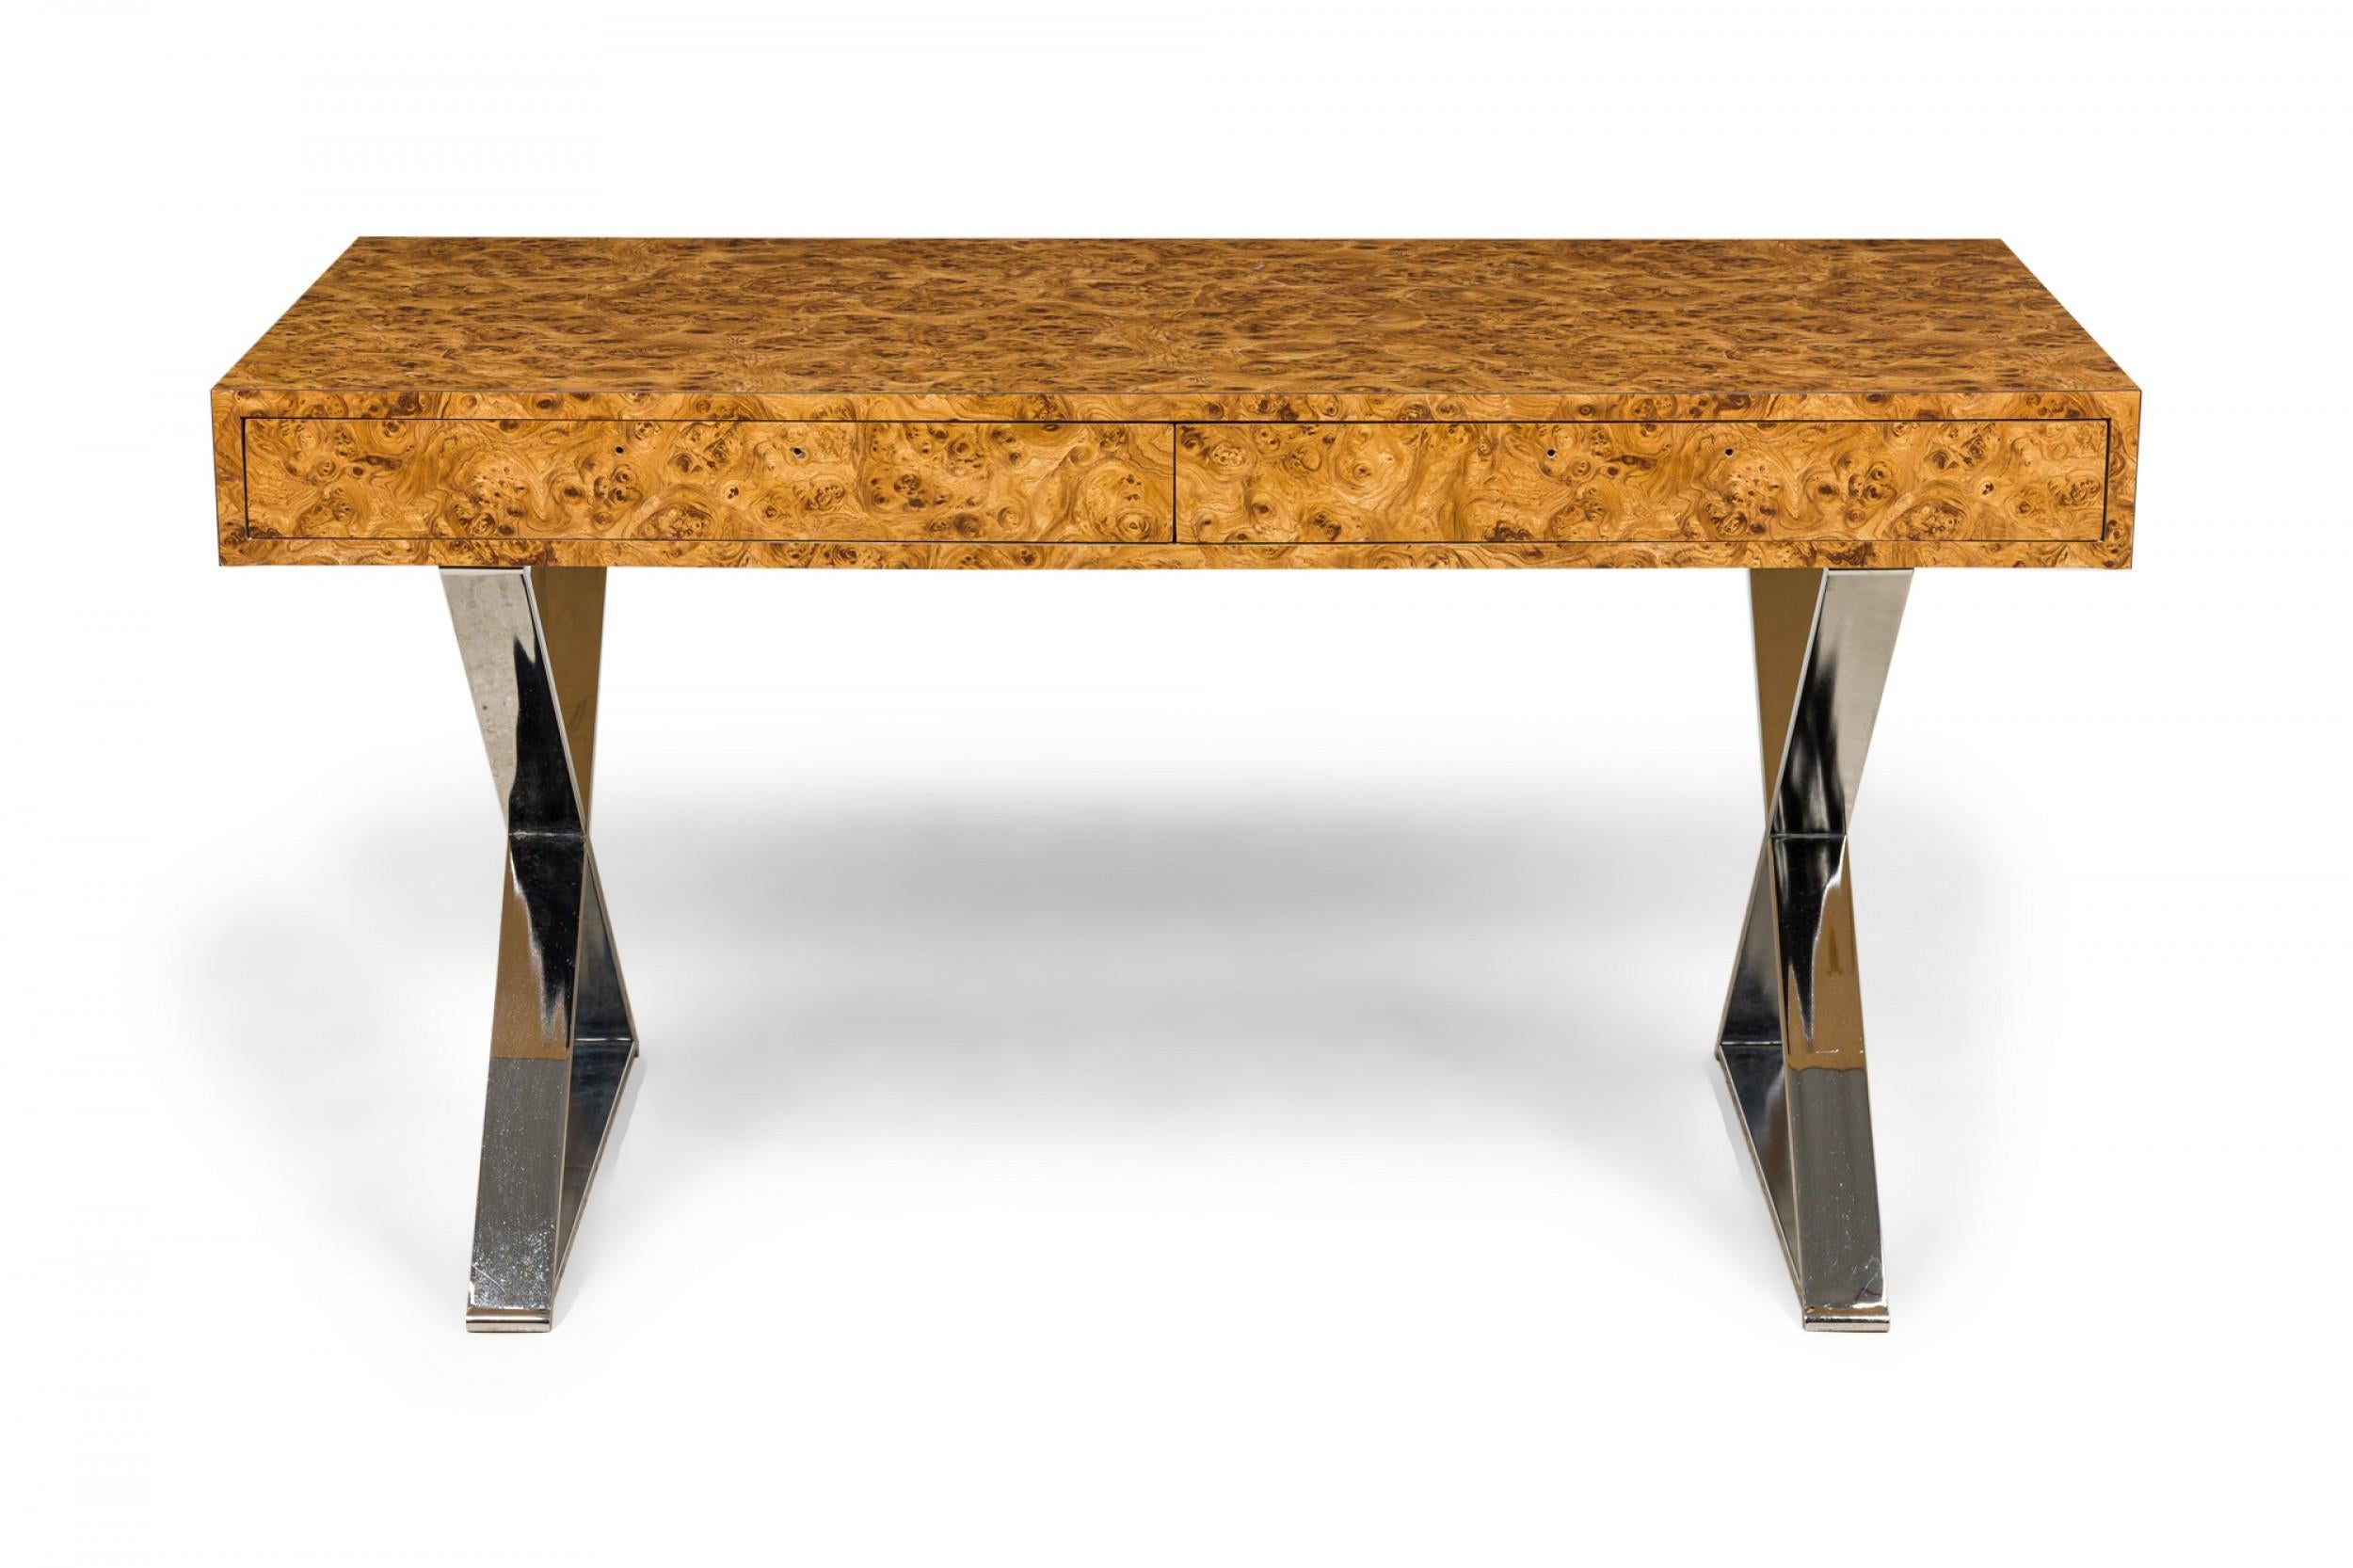 American Mid-Century rectangular campaign desk with a burl wood laminate top with two drawers, resting on two X-shaped silver metal legs.
